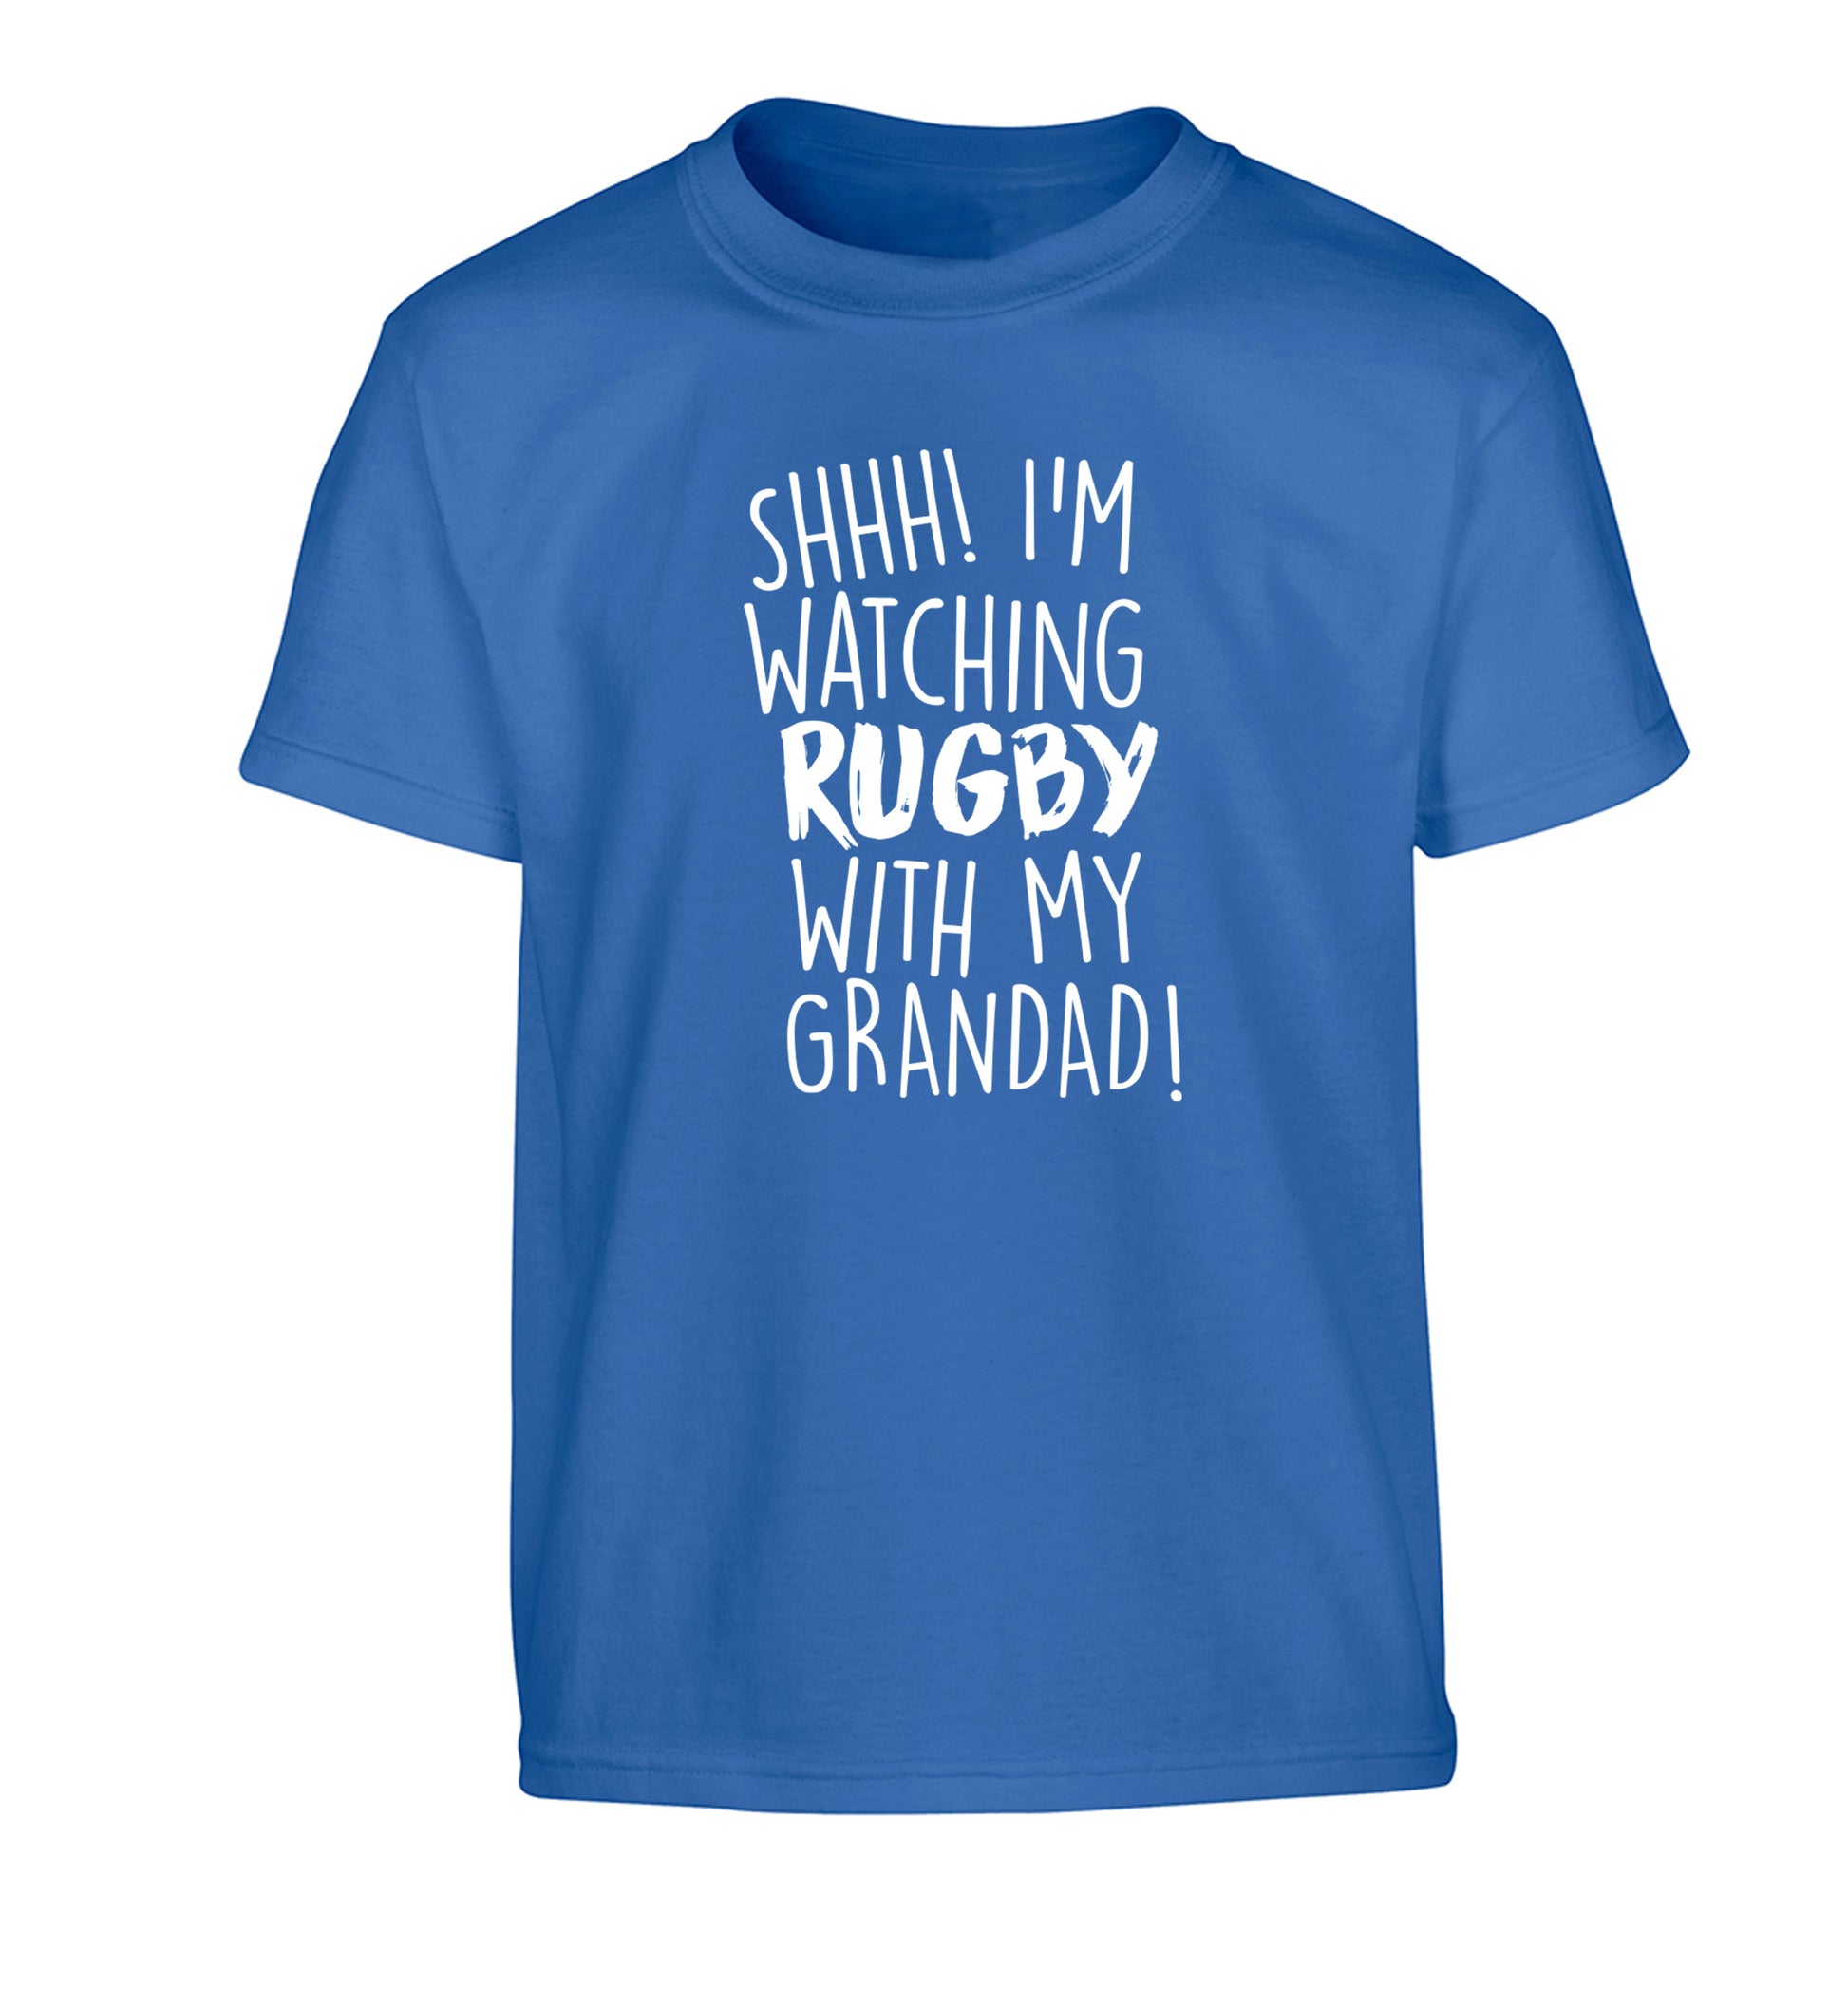 Shh I'm watching rugby with my grandad Children's blue Tshirt 12-13 Years